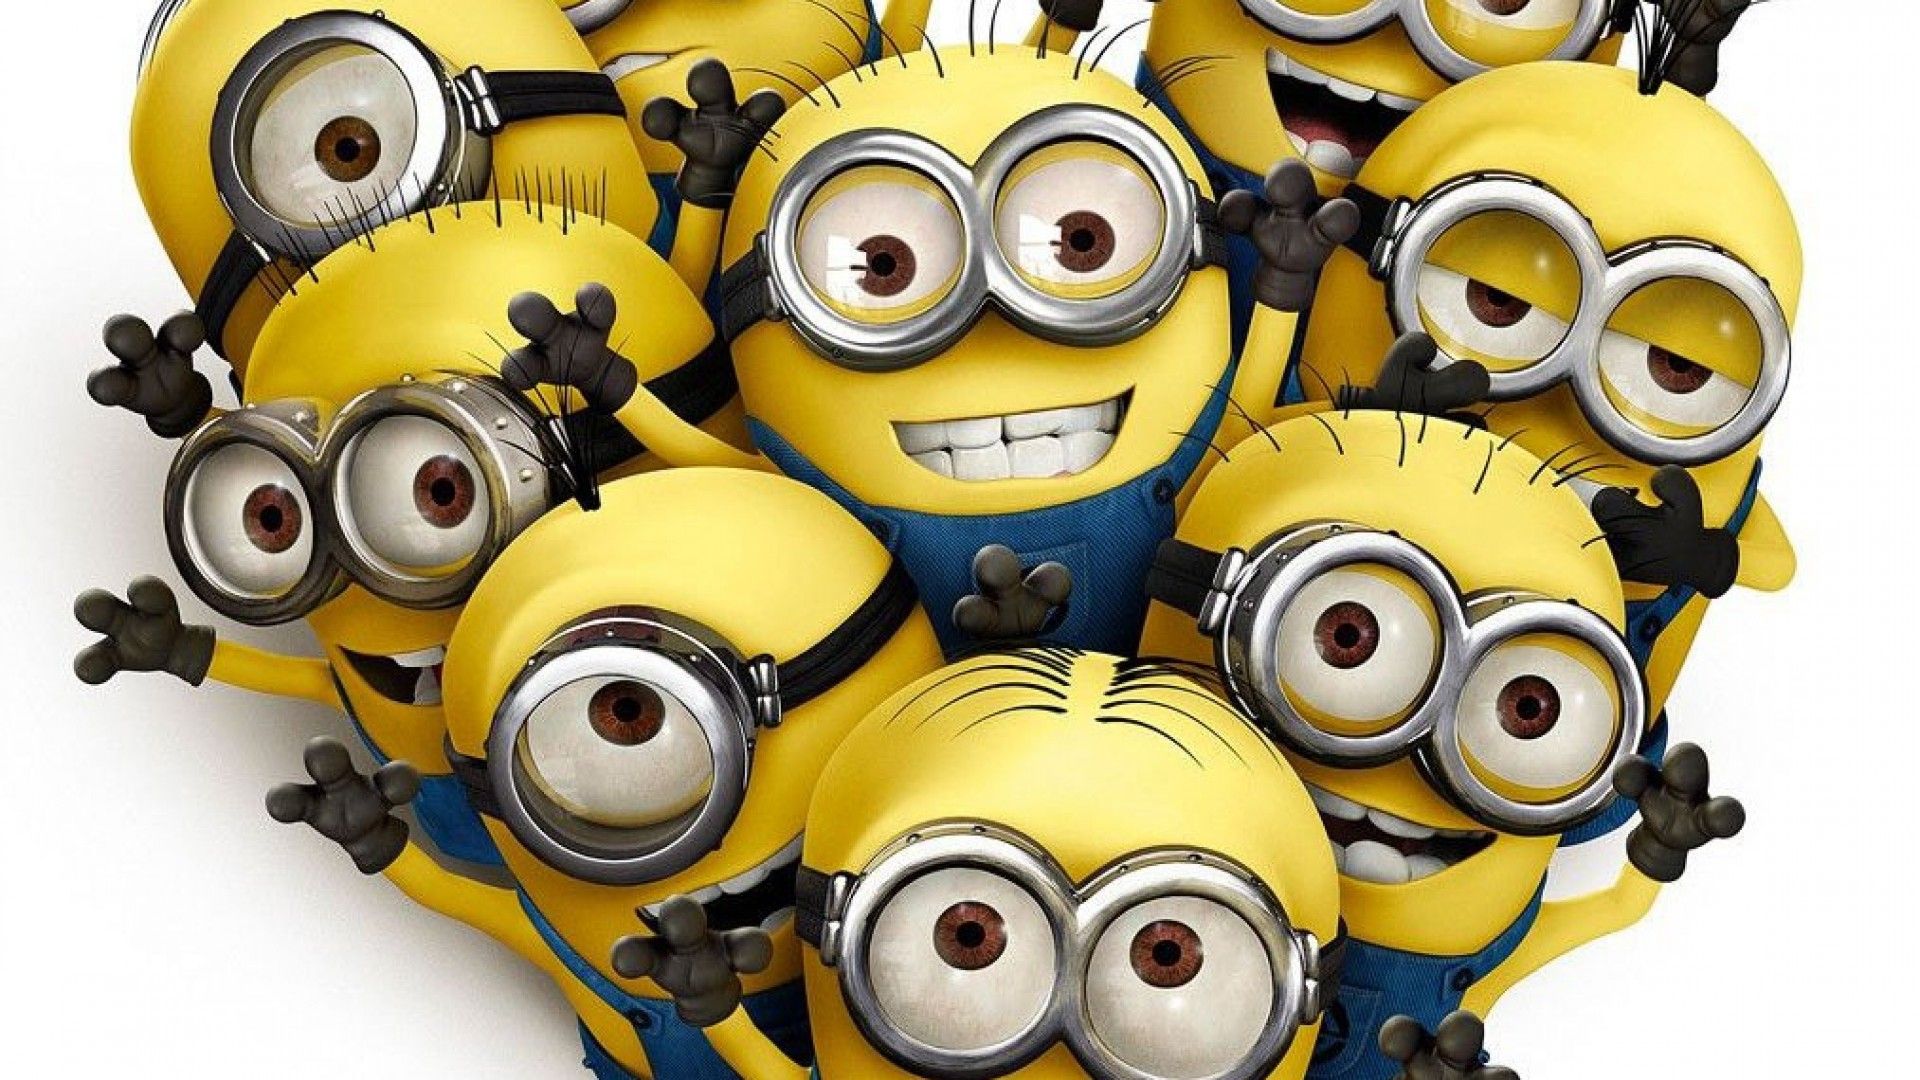 Despicable Me Minions Drawing - wallpaper.